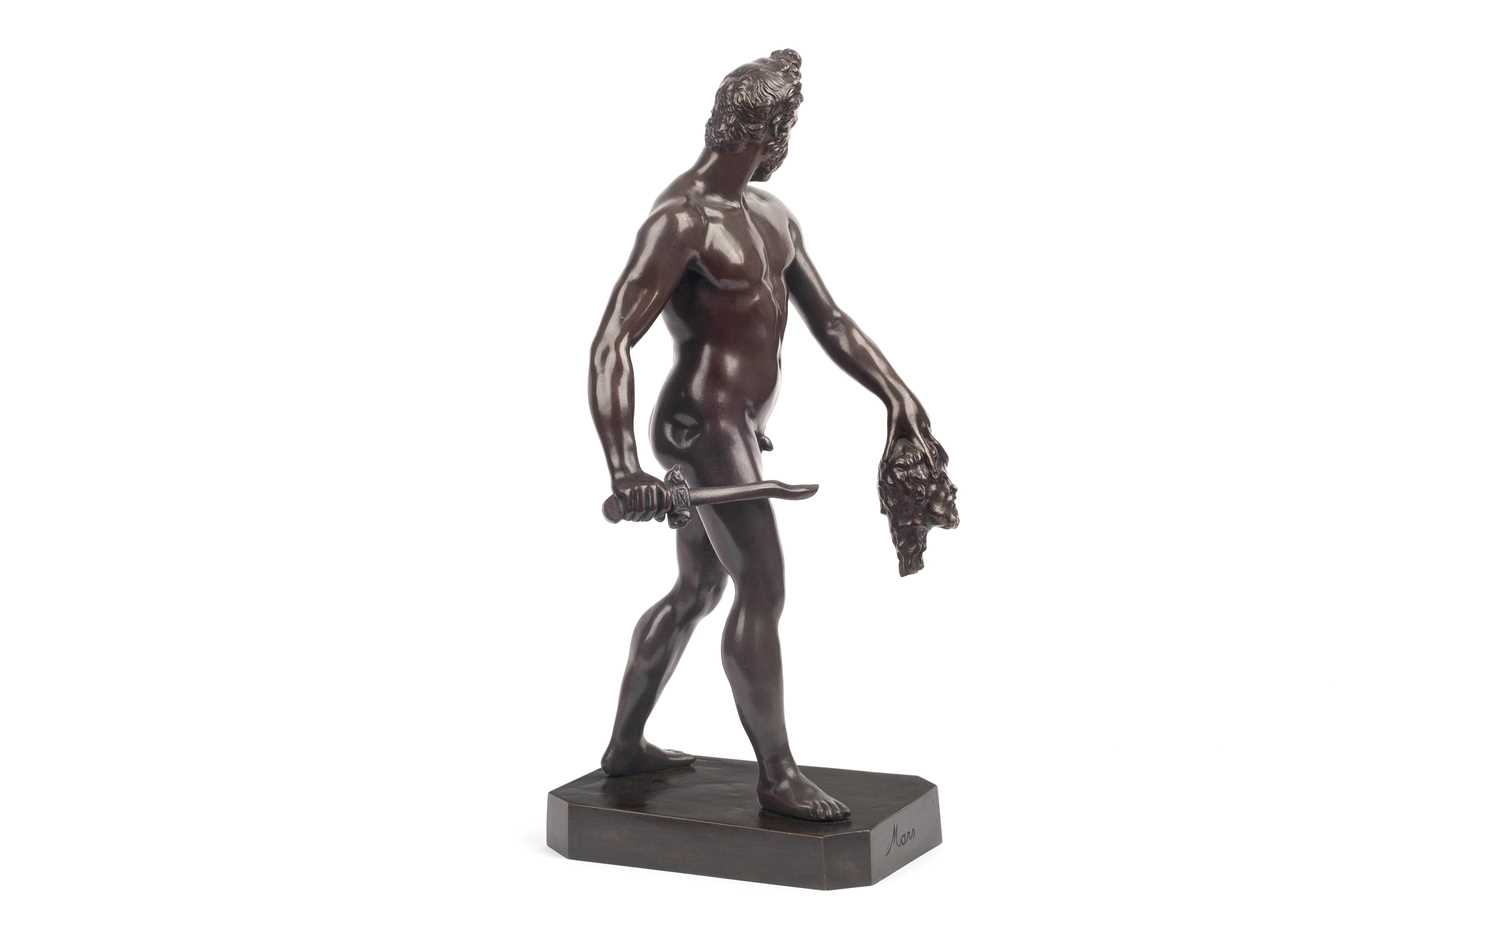 AFTER GIAMBOLOGNA (ITALIAN, 1529-1608): A 19TH CENTURY BRONZE FIGURE OF MARS - Image 2 of 6